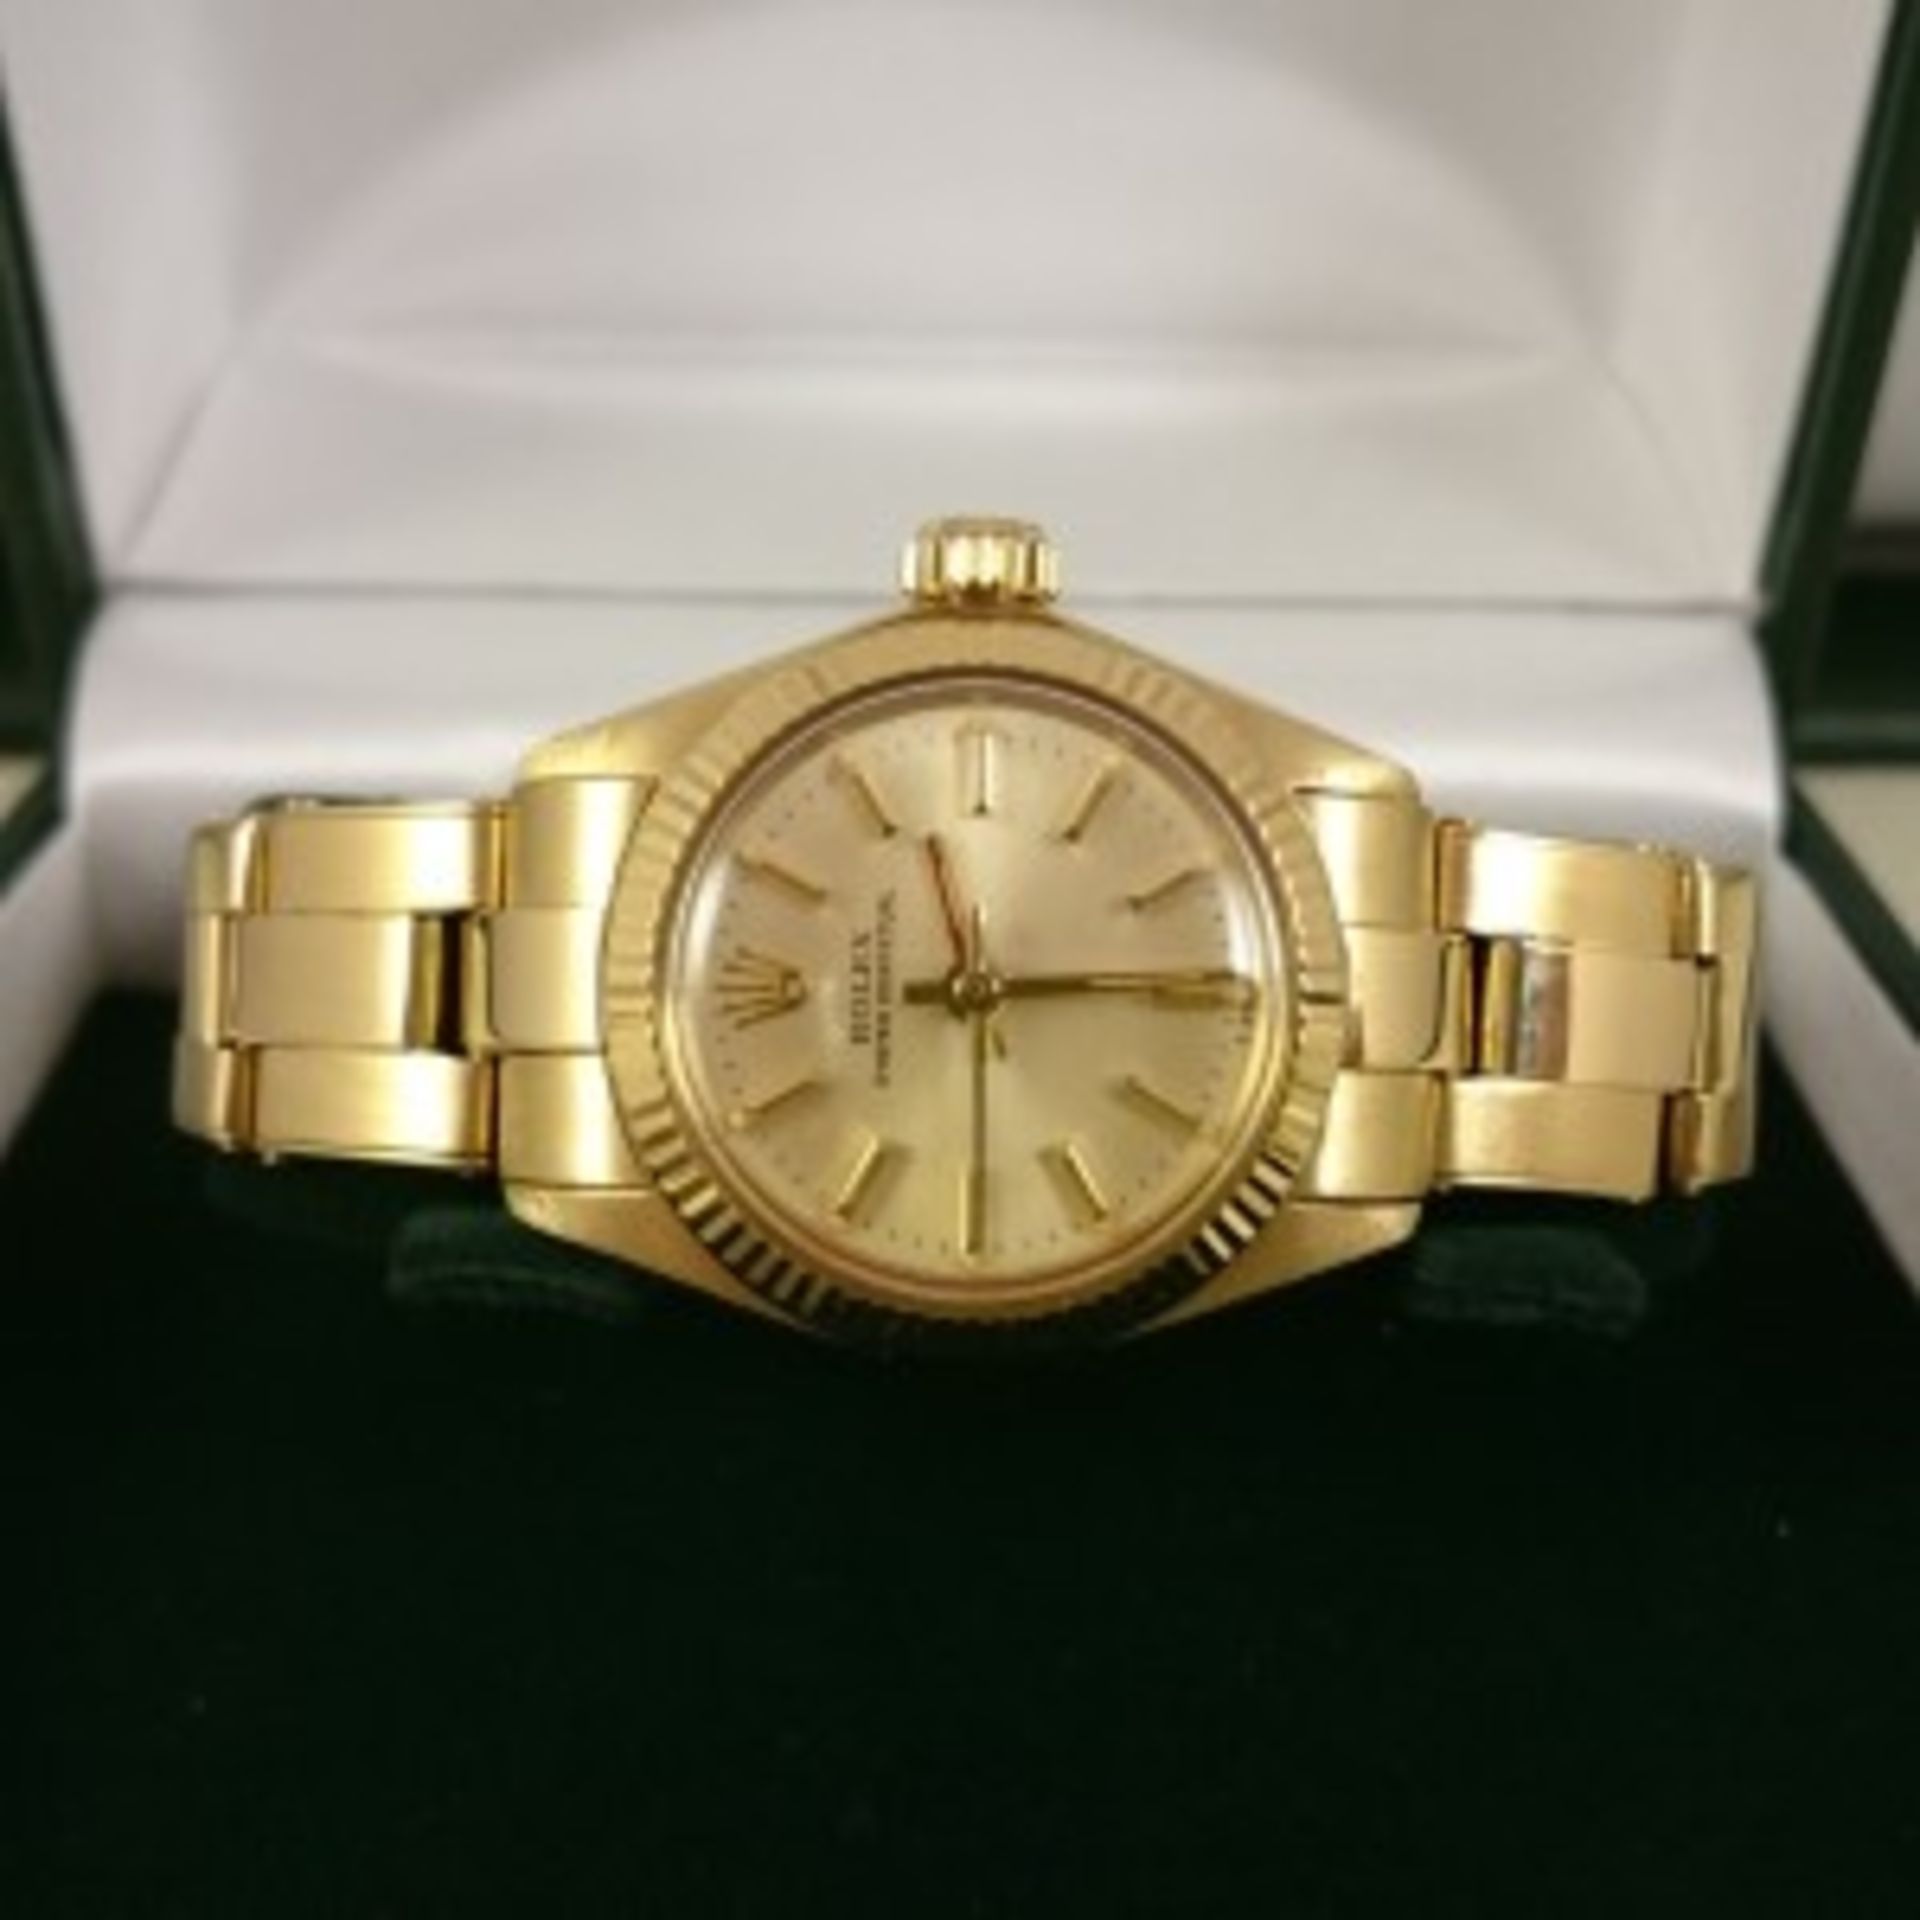 18ct GOLD ROLEX OYSTER PERPETUAL WATCH